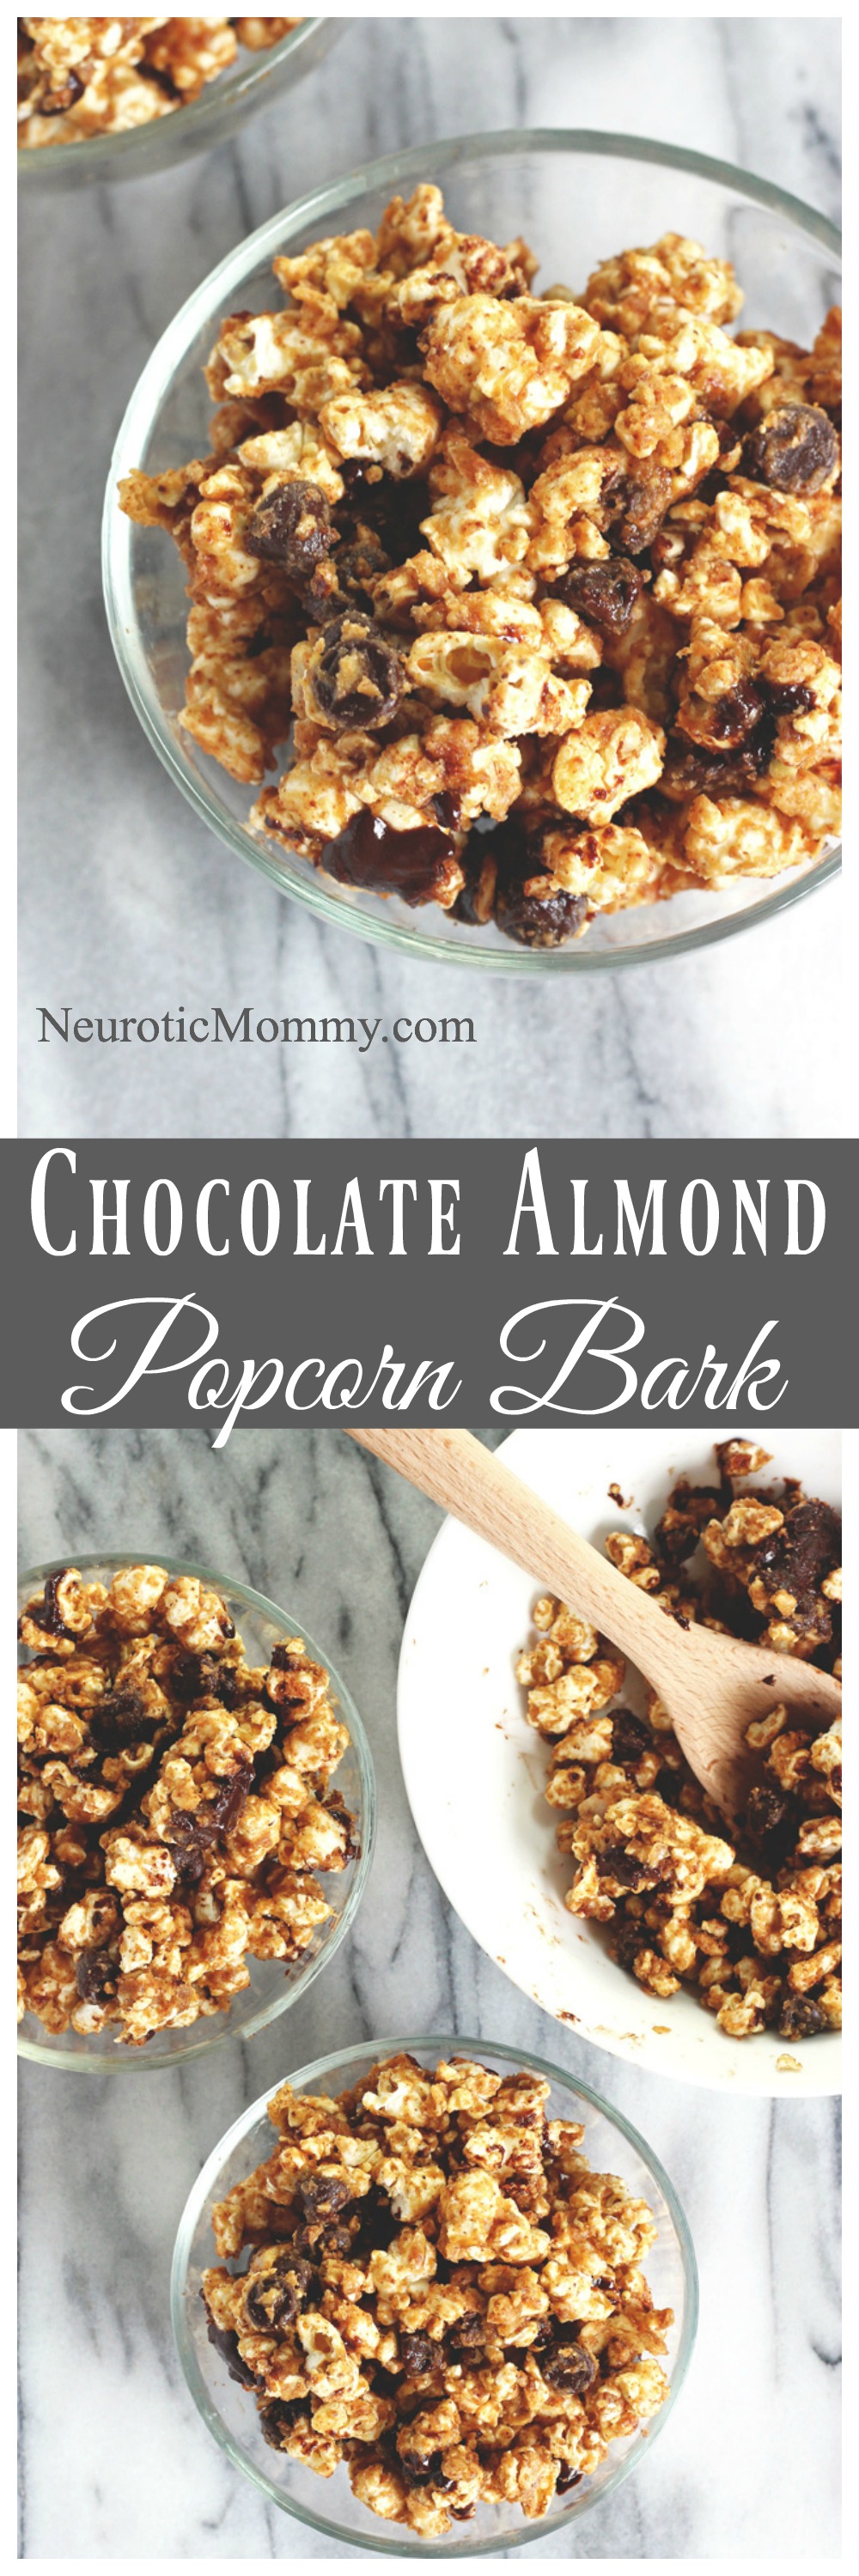 Back To School Popcorn Bark - A quick, simple, wholesome snack for the whole family to enjoy! NeuroticMommy.com #vegan #backtoschool #snacks